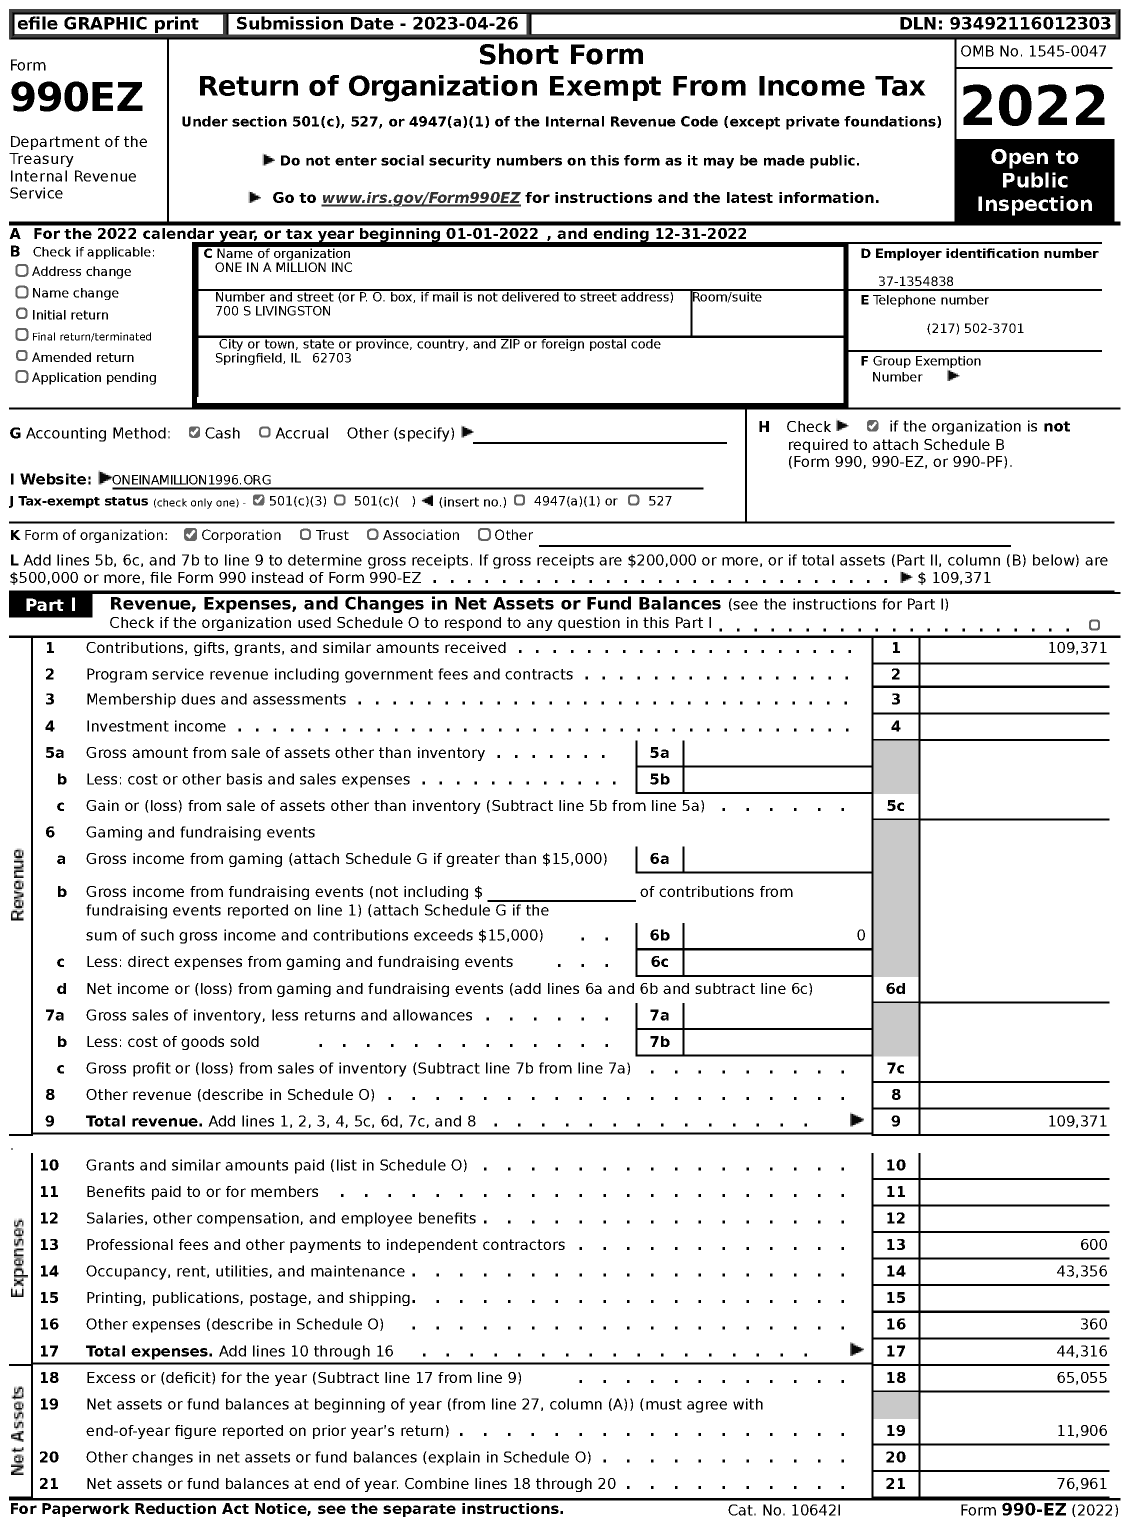 Image of first page of 2022 Form 990EZ for One in A Million